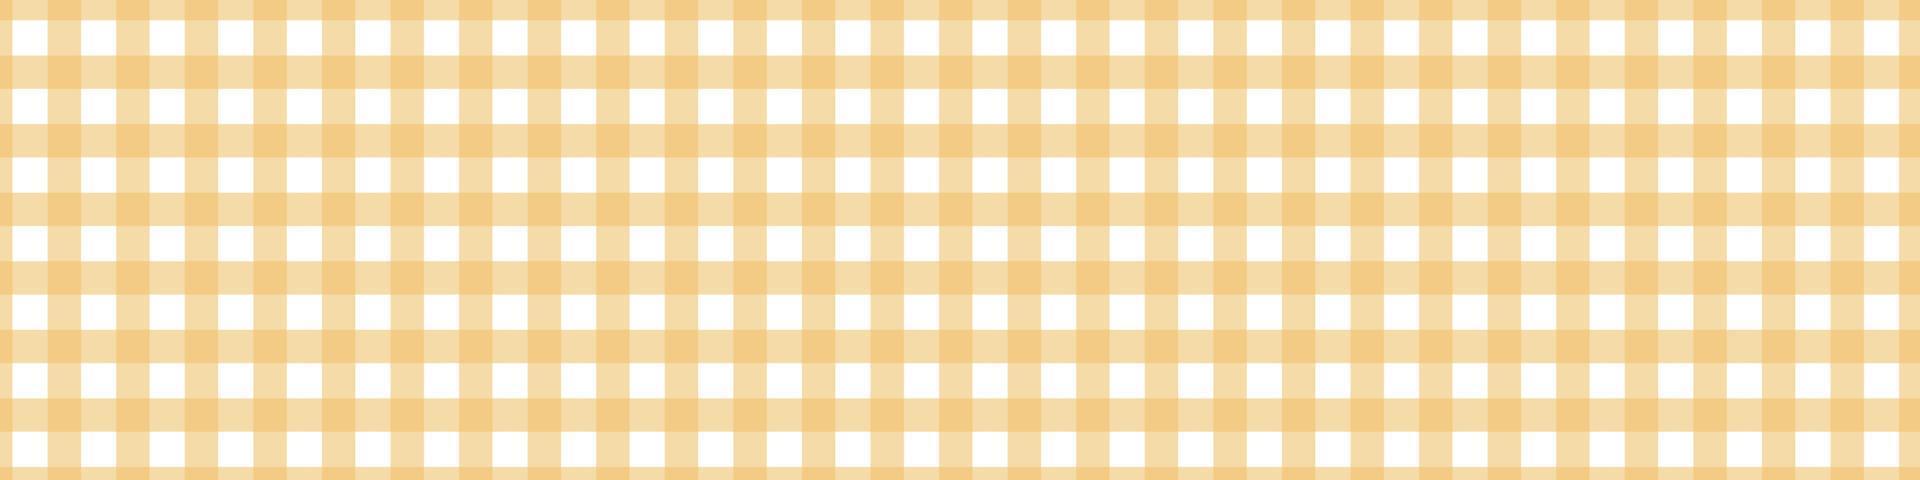 Gingham yellow pattern. Vichy tablecloth for picnic. Square texture for cloth. Vector illustration